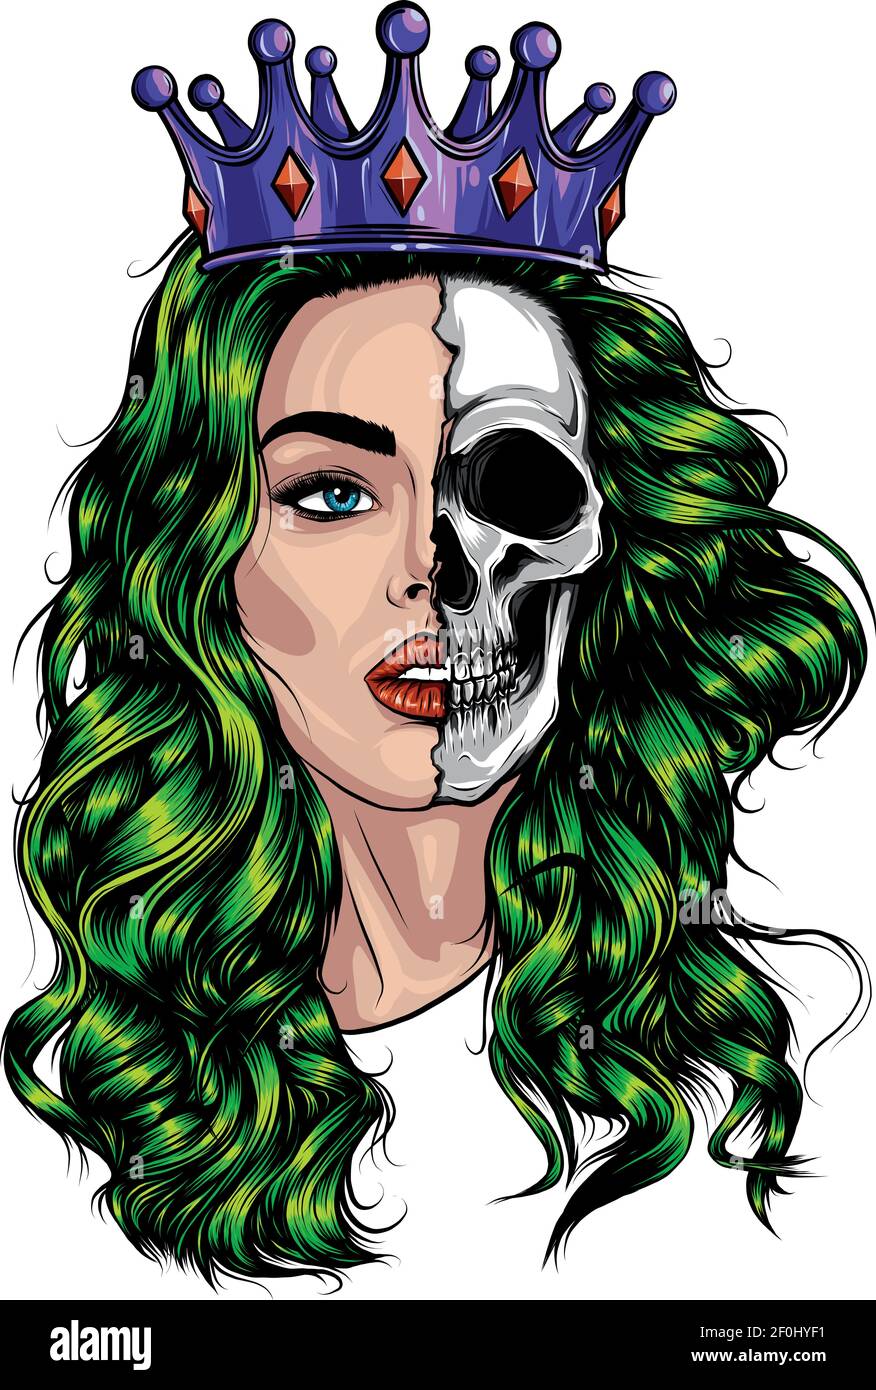 Skull face girl with a crown with green hair Stock Vector